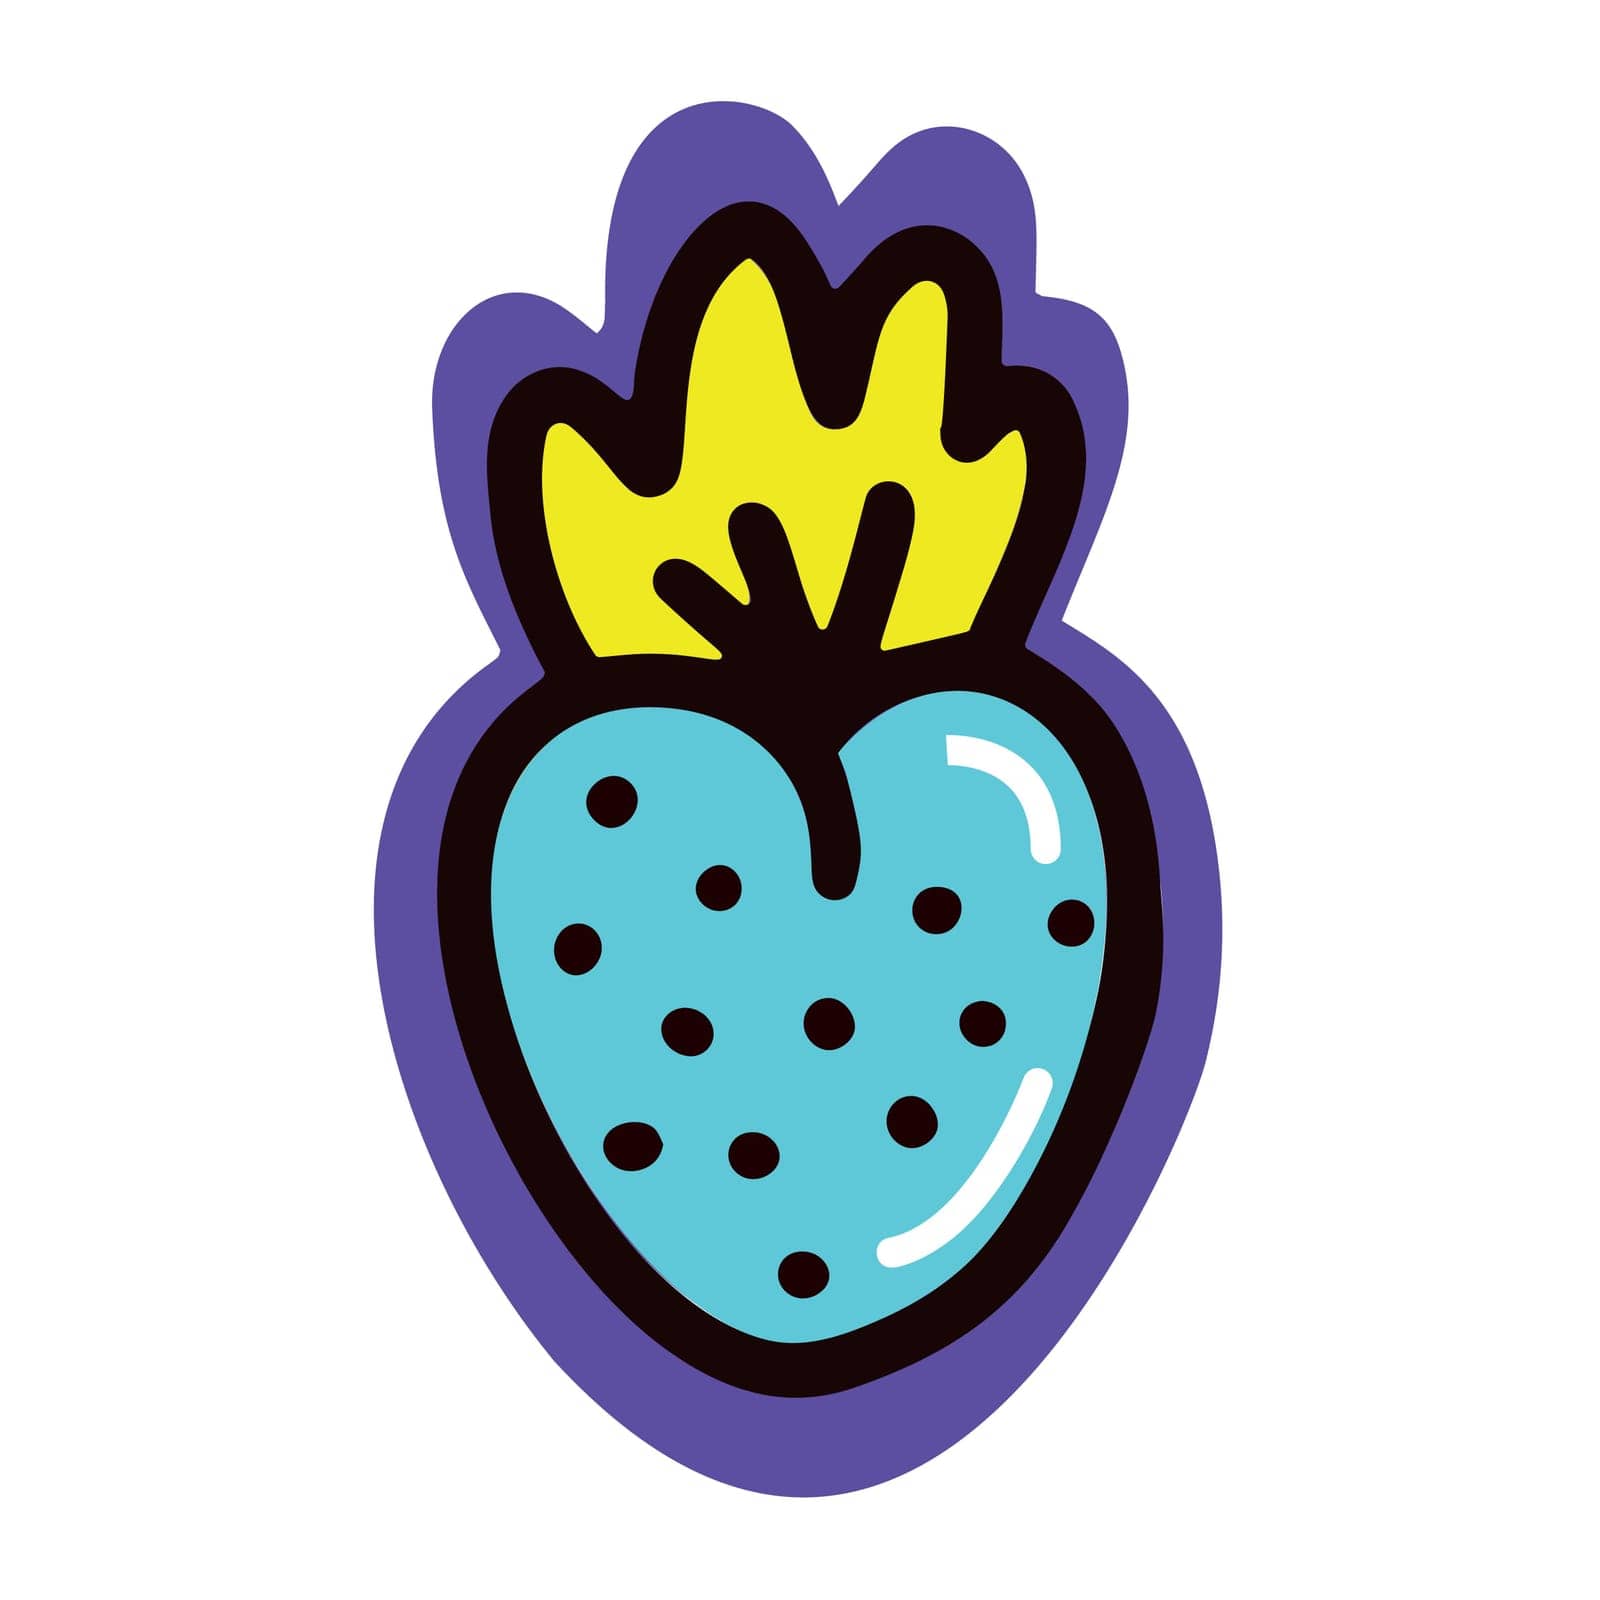 Blue berry sticker on a white background. Vector illustration by Dustick